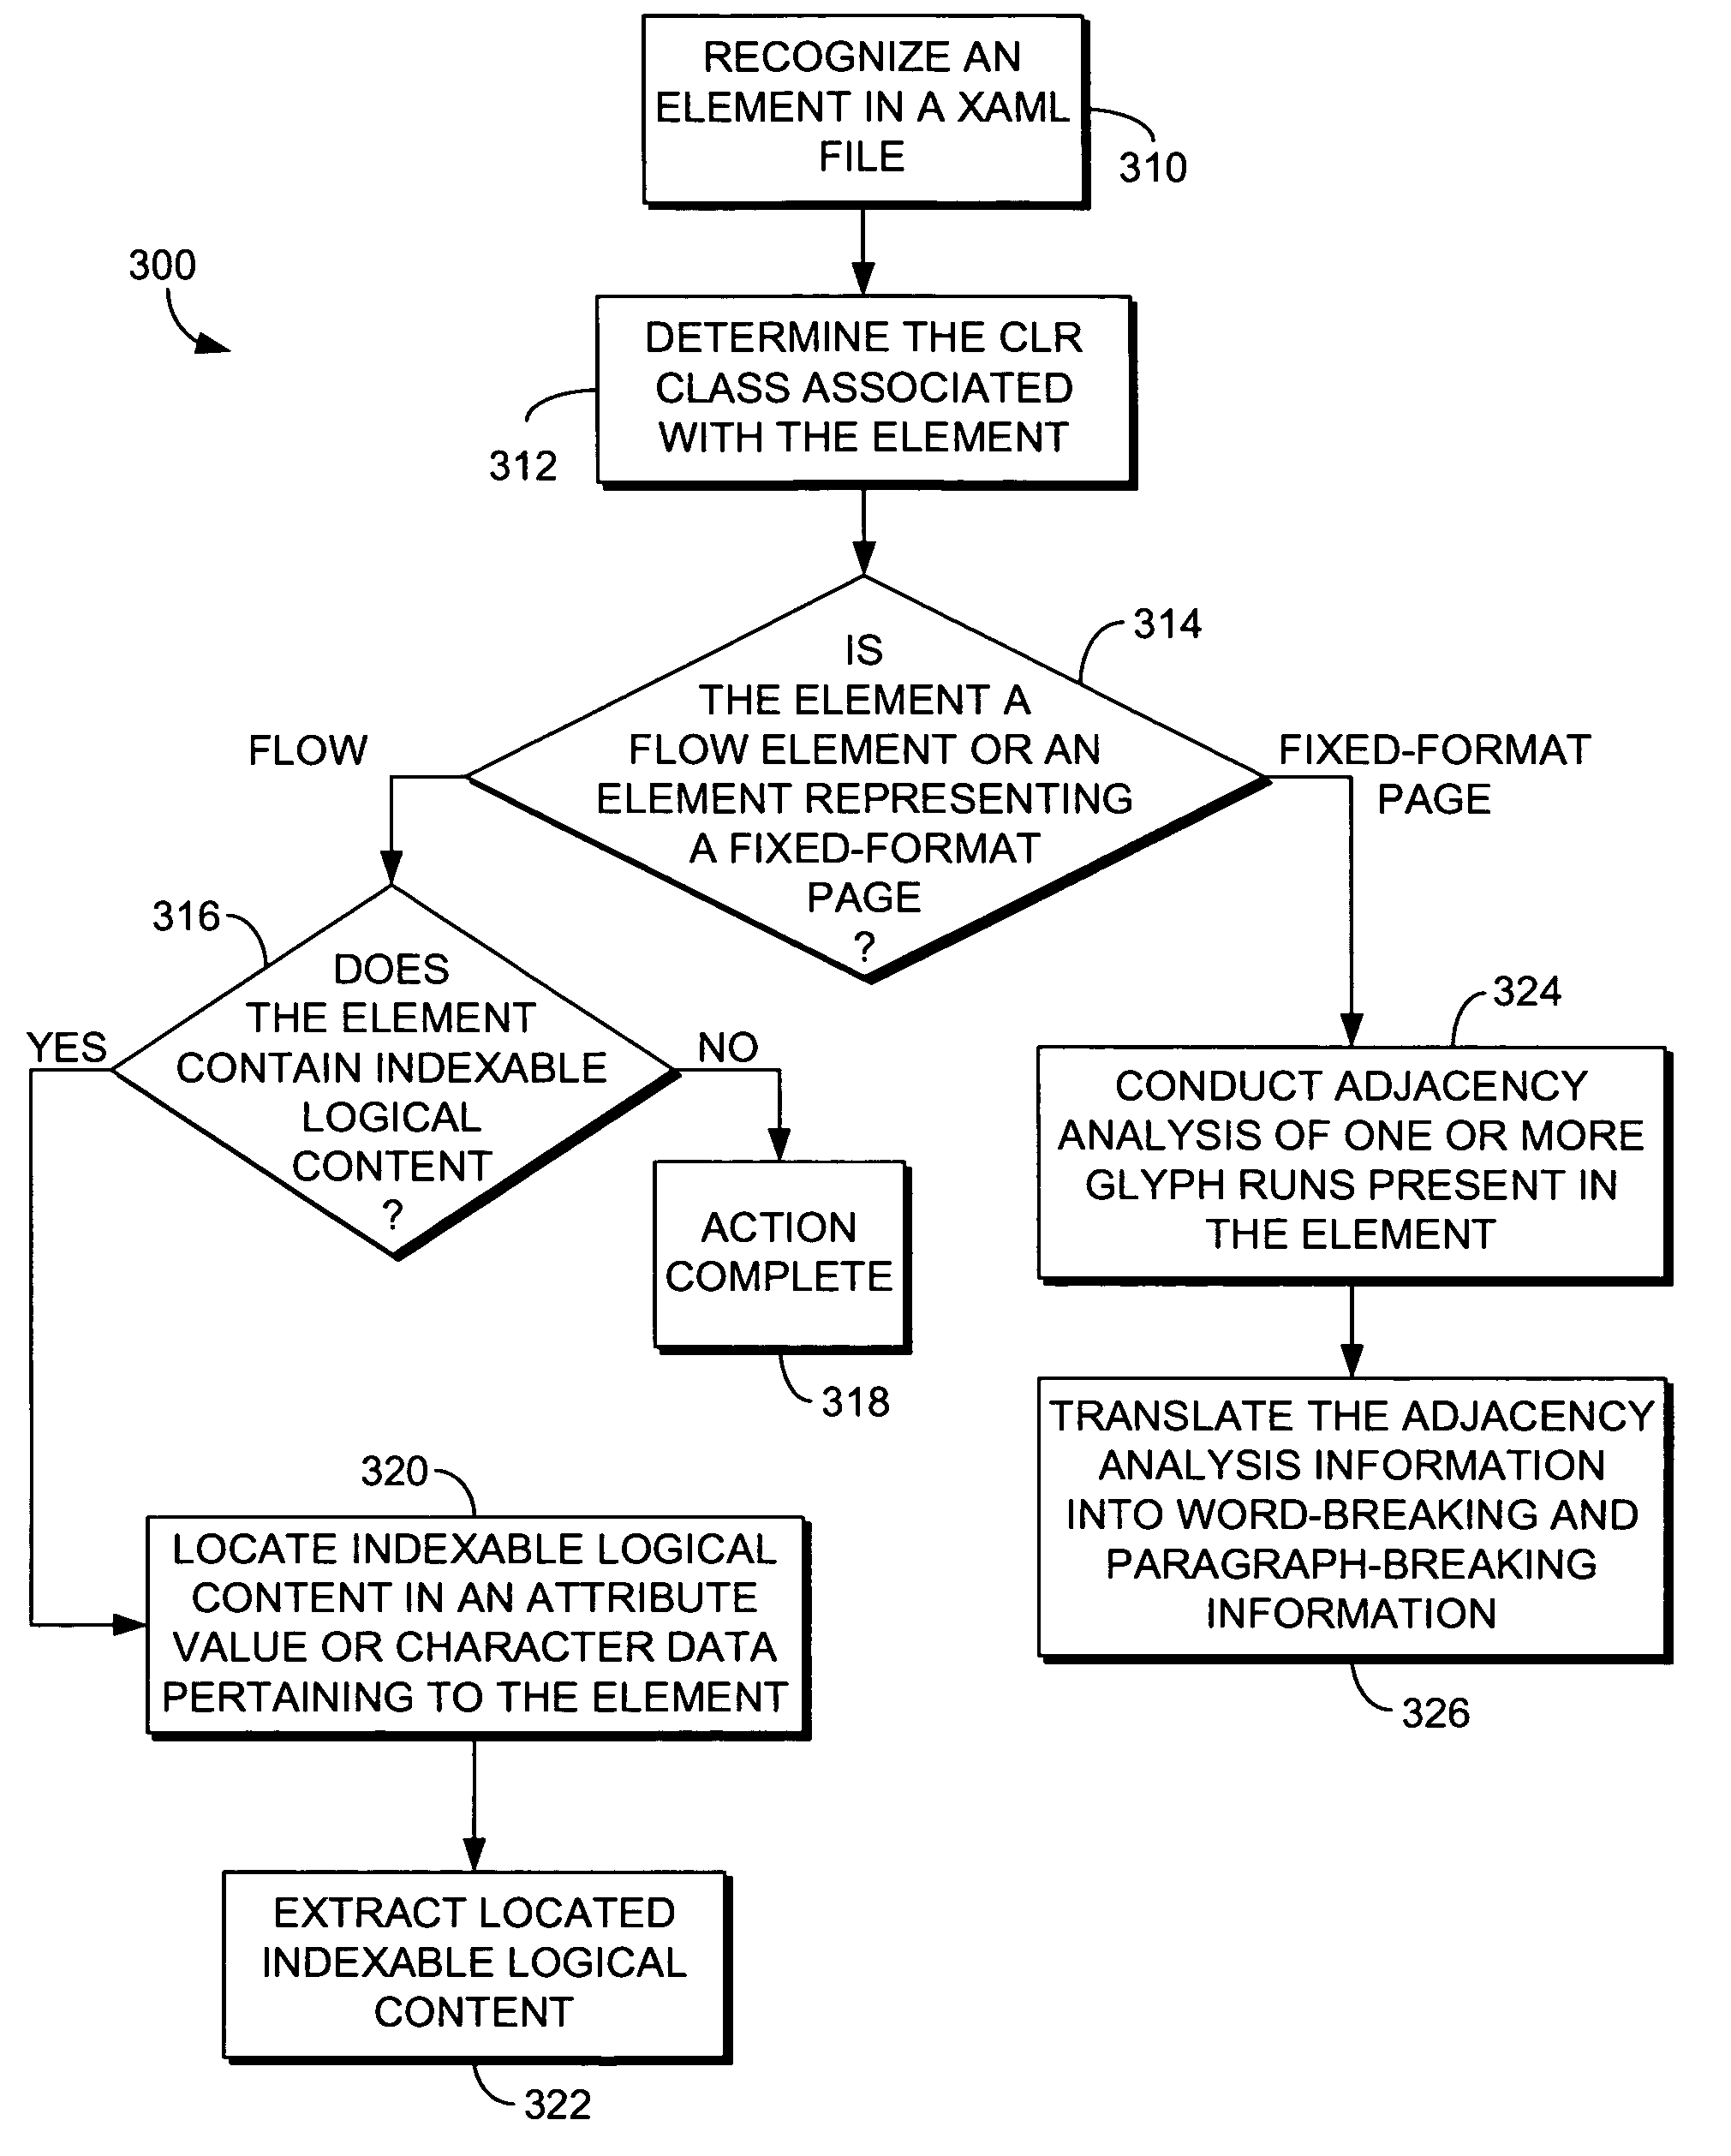 Methods and systems for filtering an Extensible Application Markup Language (XAML) file to facilitate indexing of the logical content contained therein